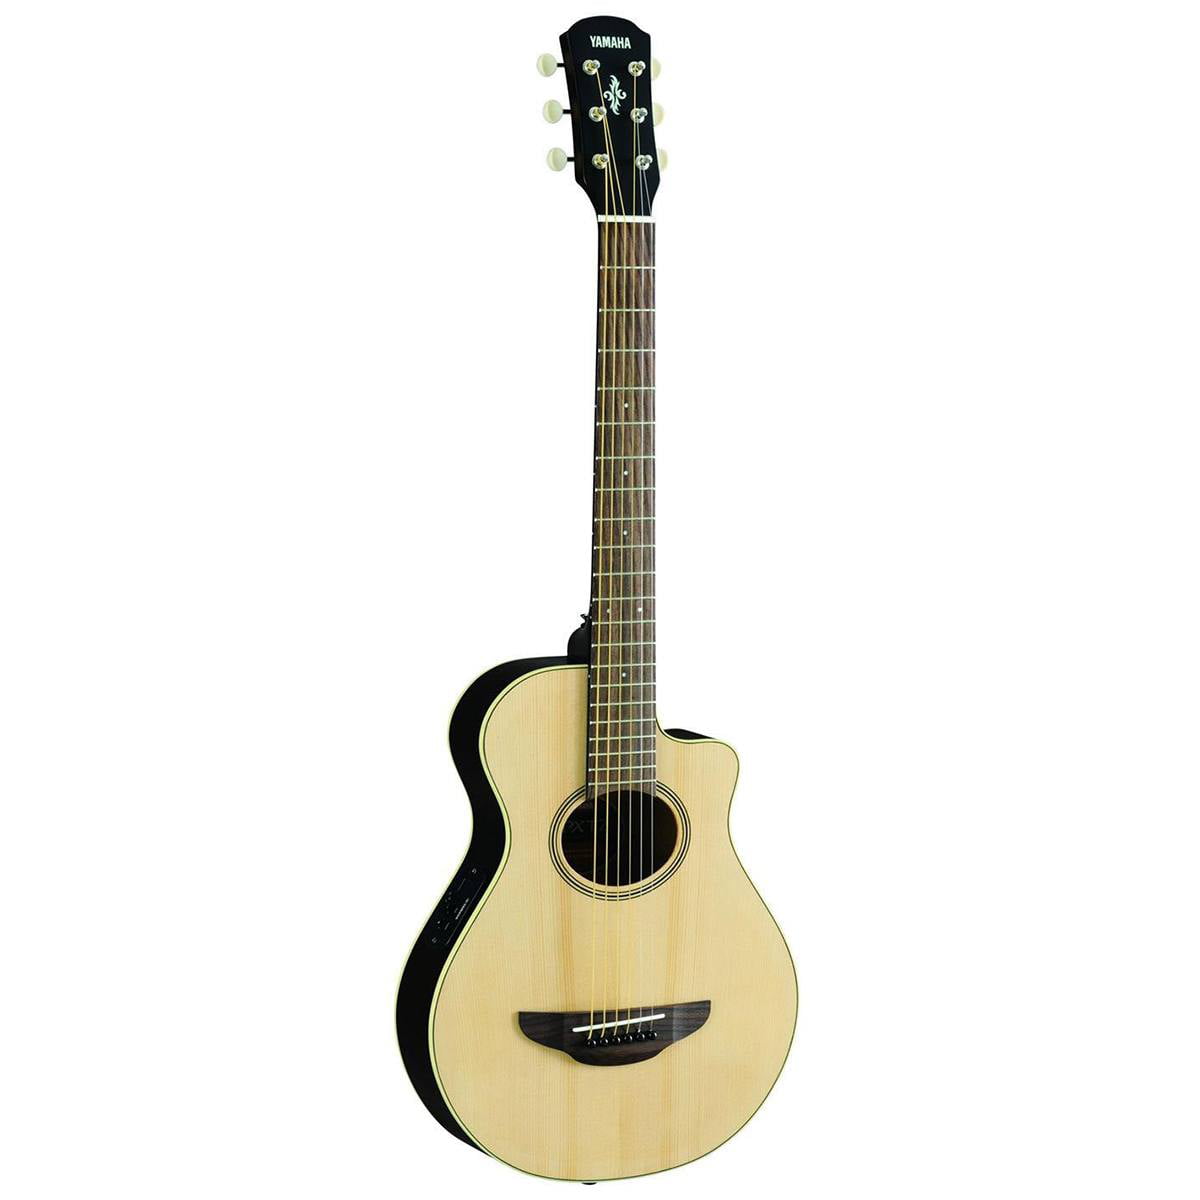 Yamaha APXT2 Size Travel Acoustic-Electric Guitar with Accessories - Walmart.com